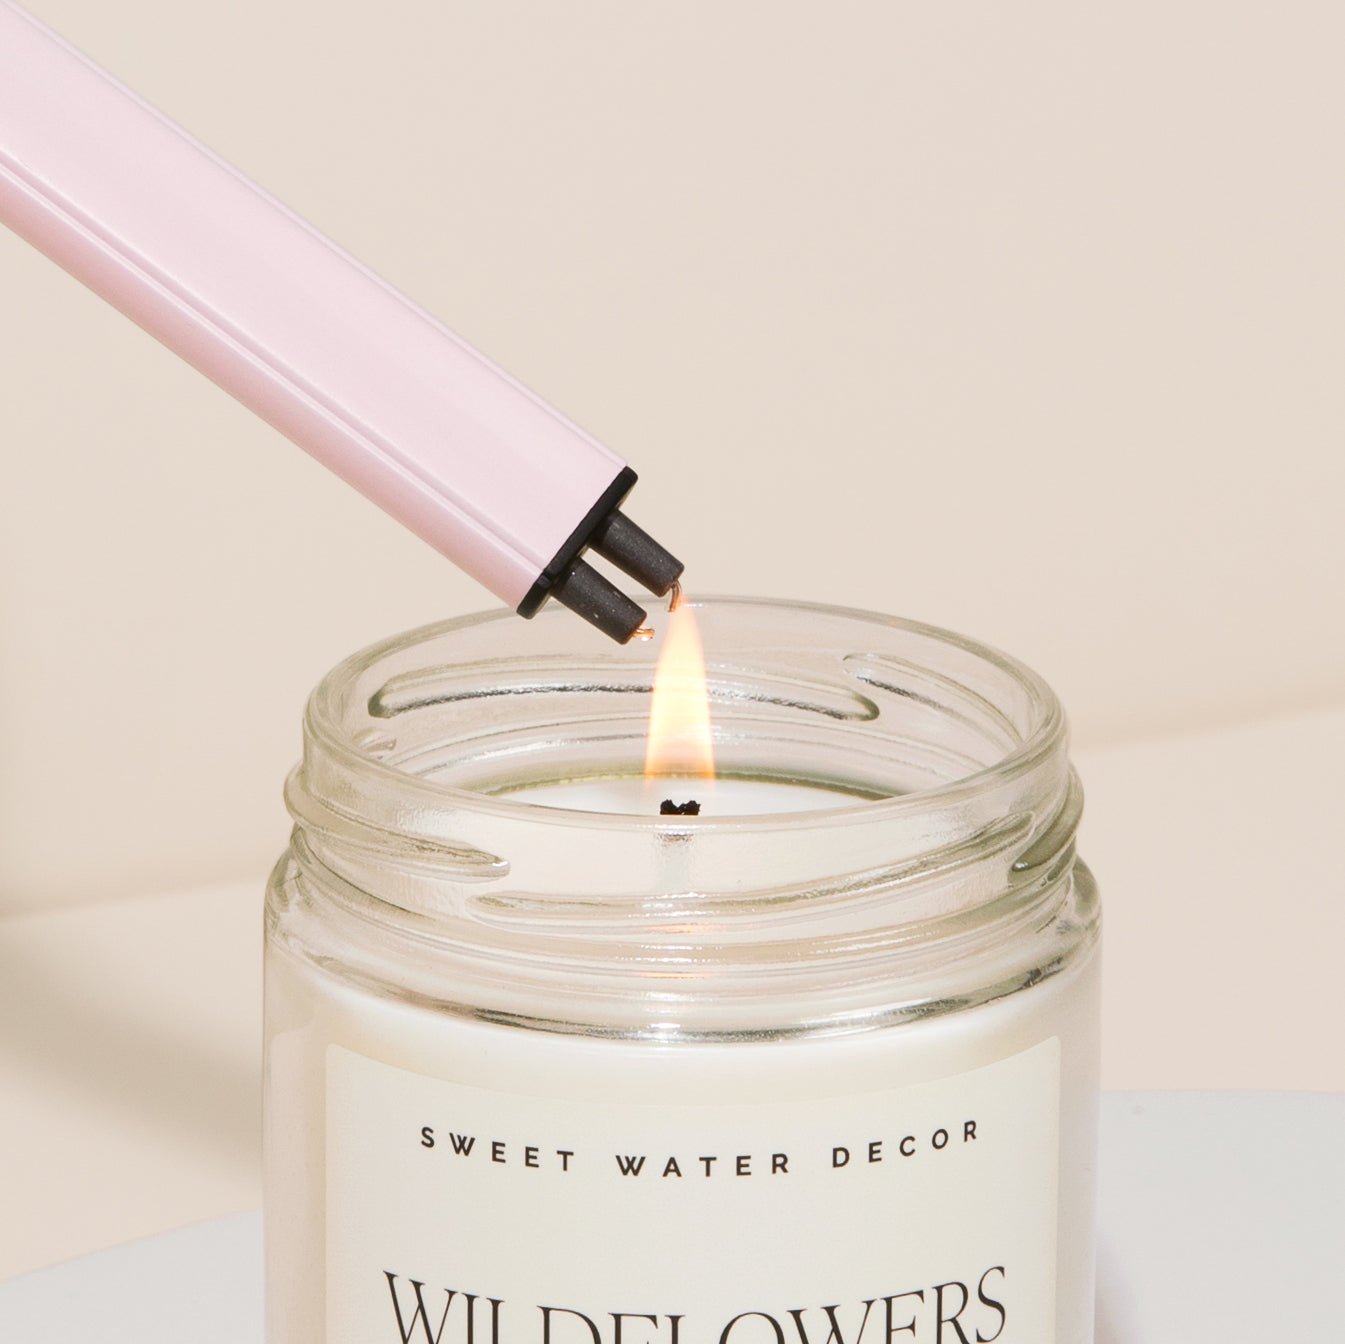 Blush Pink Electric Lighter - Sweet Water Decor - Lighters